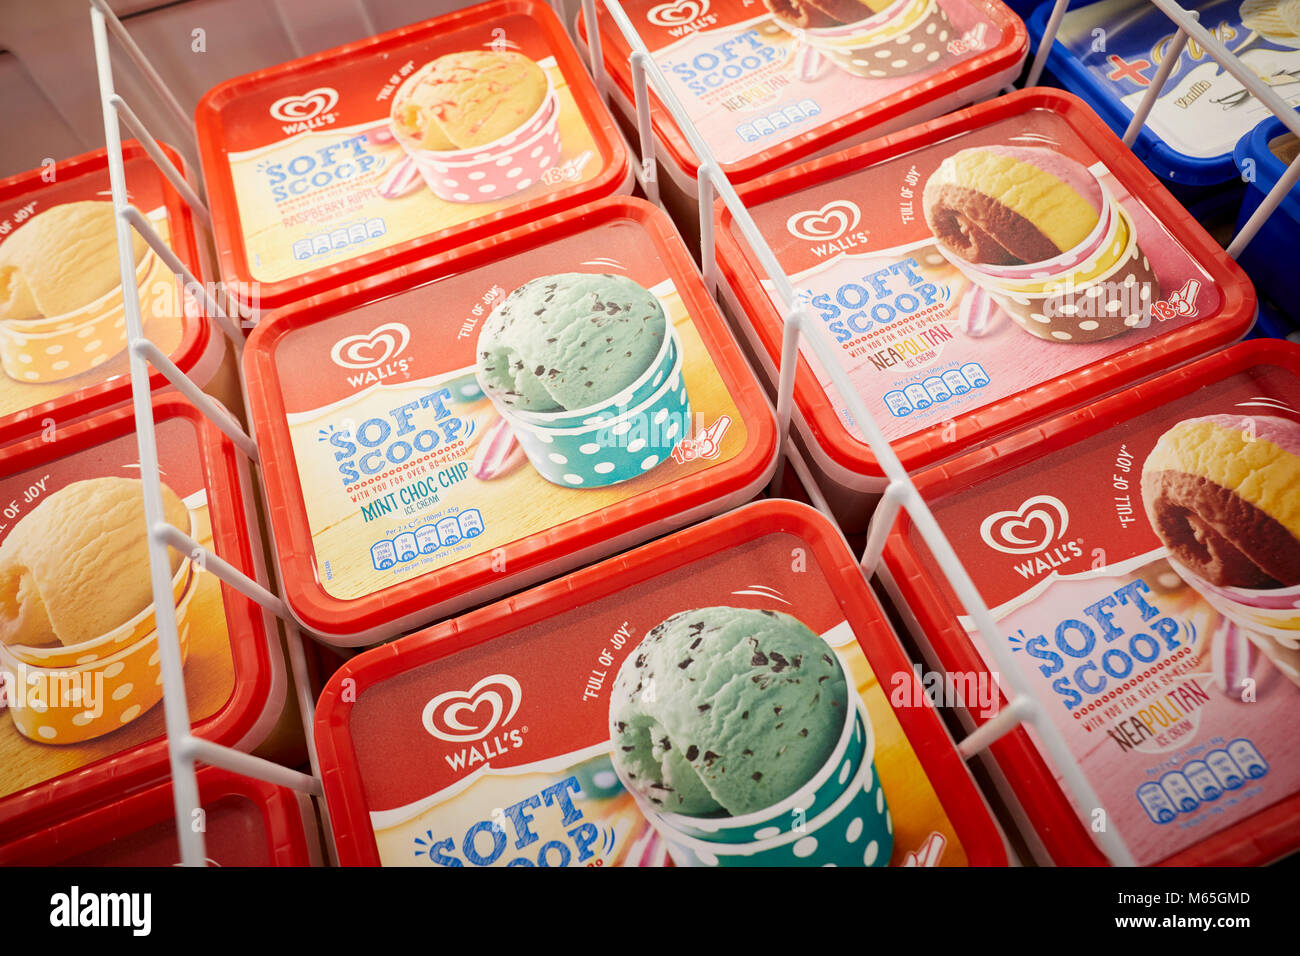 Walls ice-cream in tubs in the freezer section of shop Stock Photo